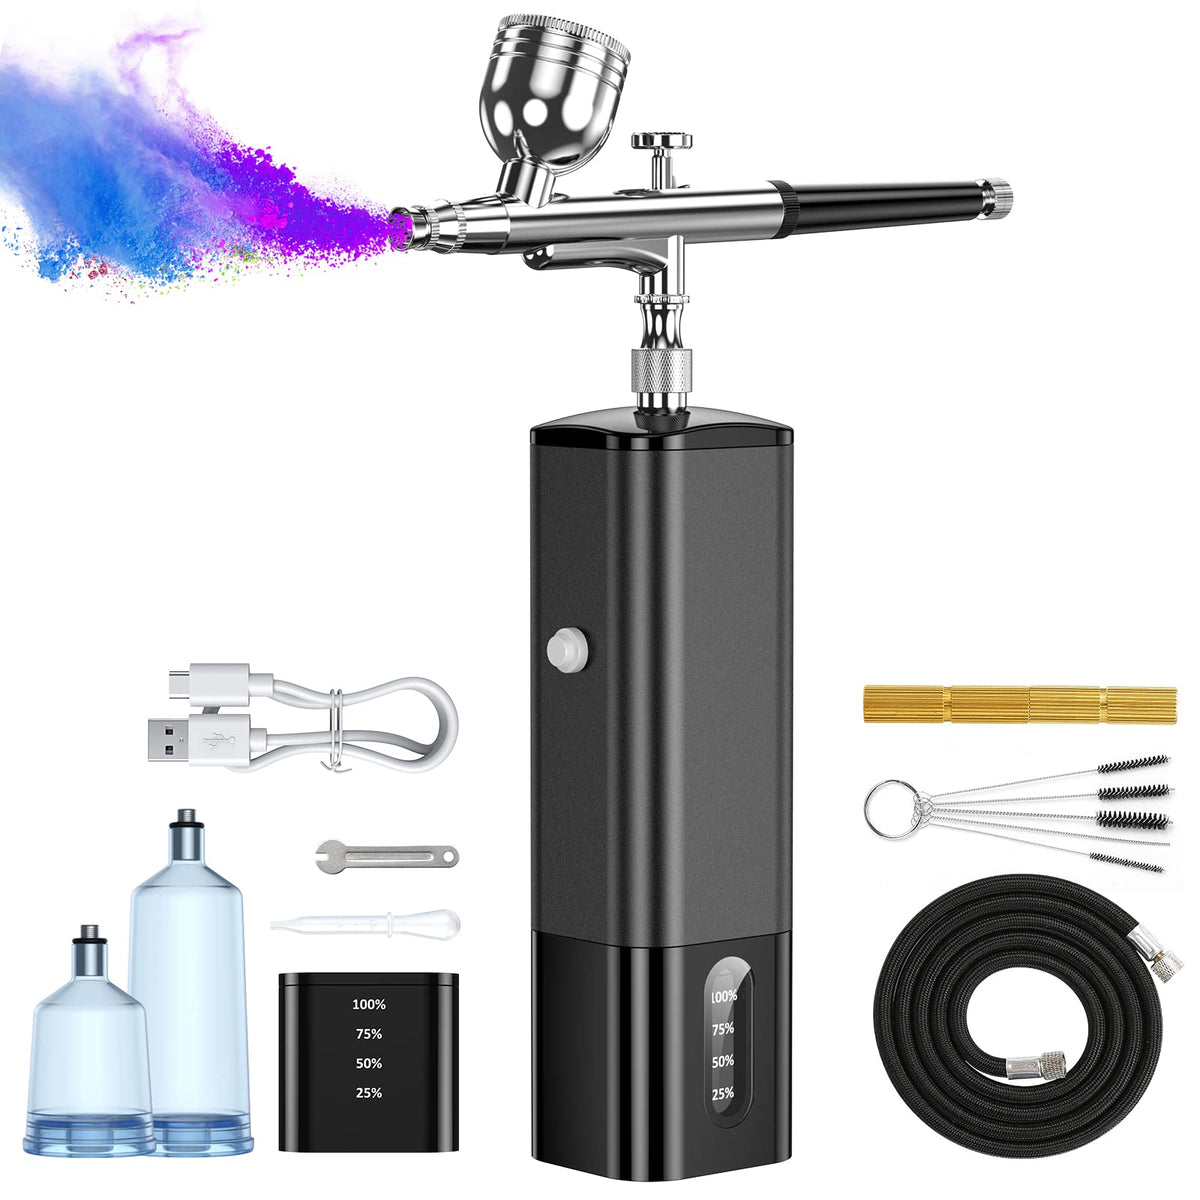 Portable USB Rechargeable Cake Decorating Airbrush Kit 